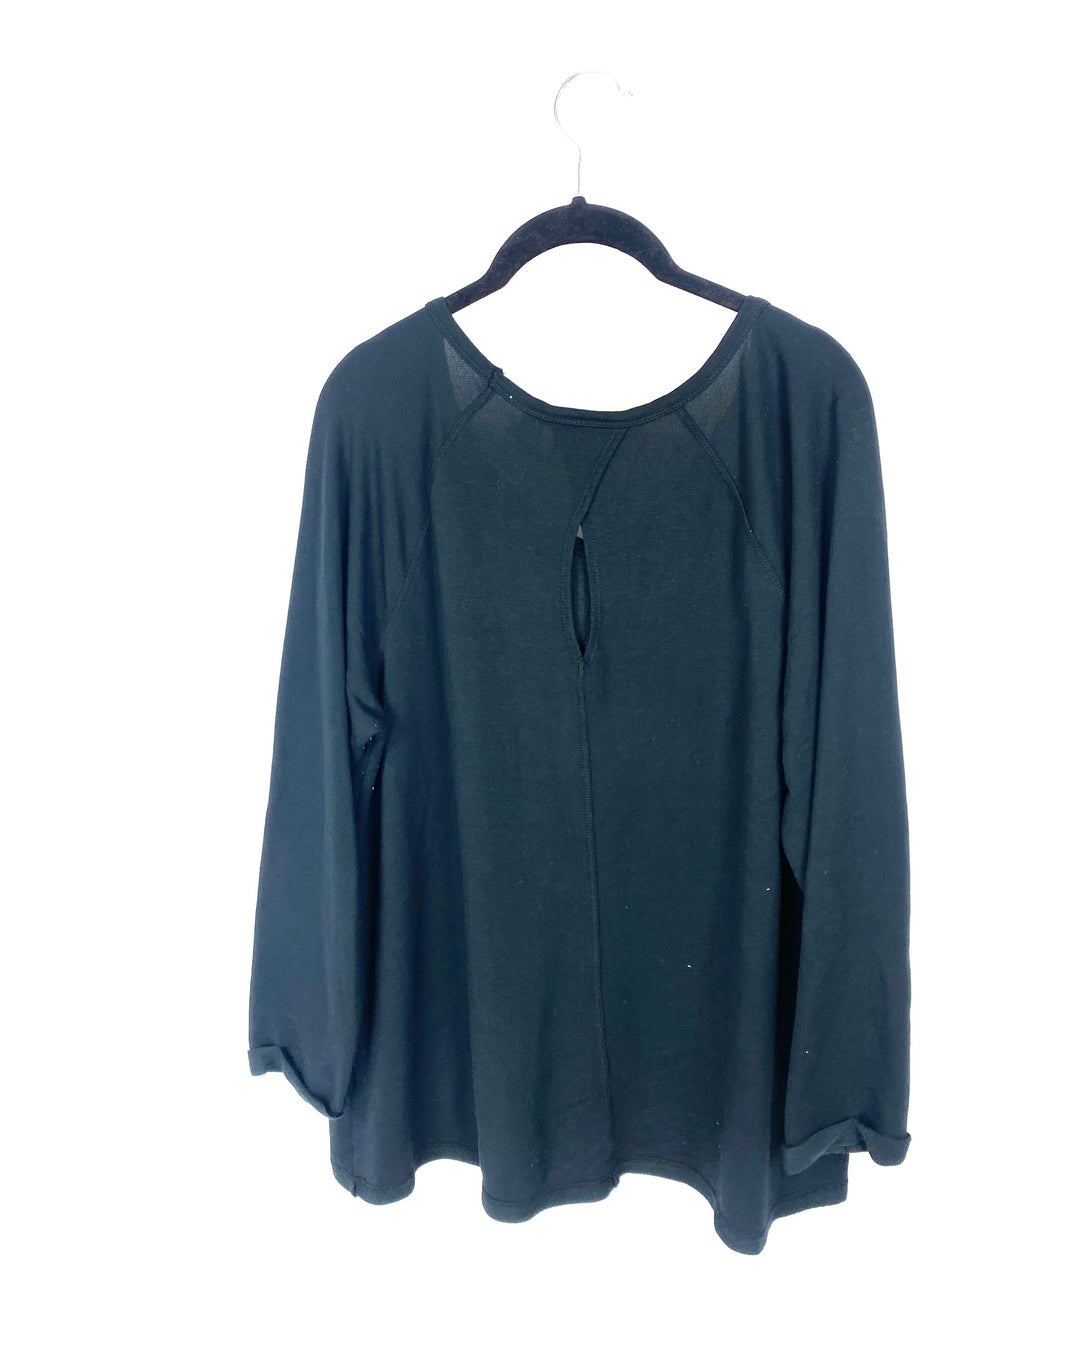 Black Long Sleeve Top Cutout Back - Small And Large